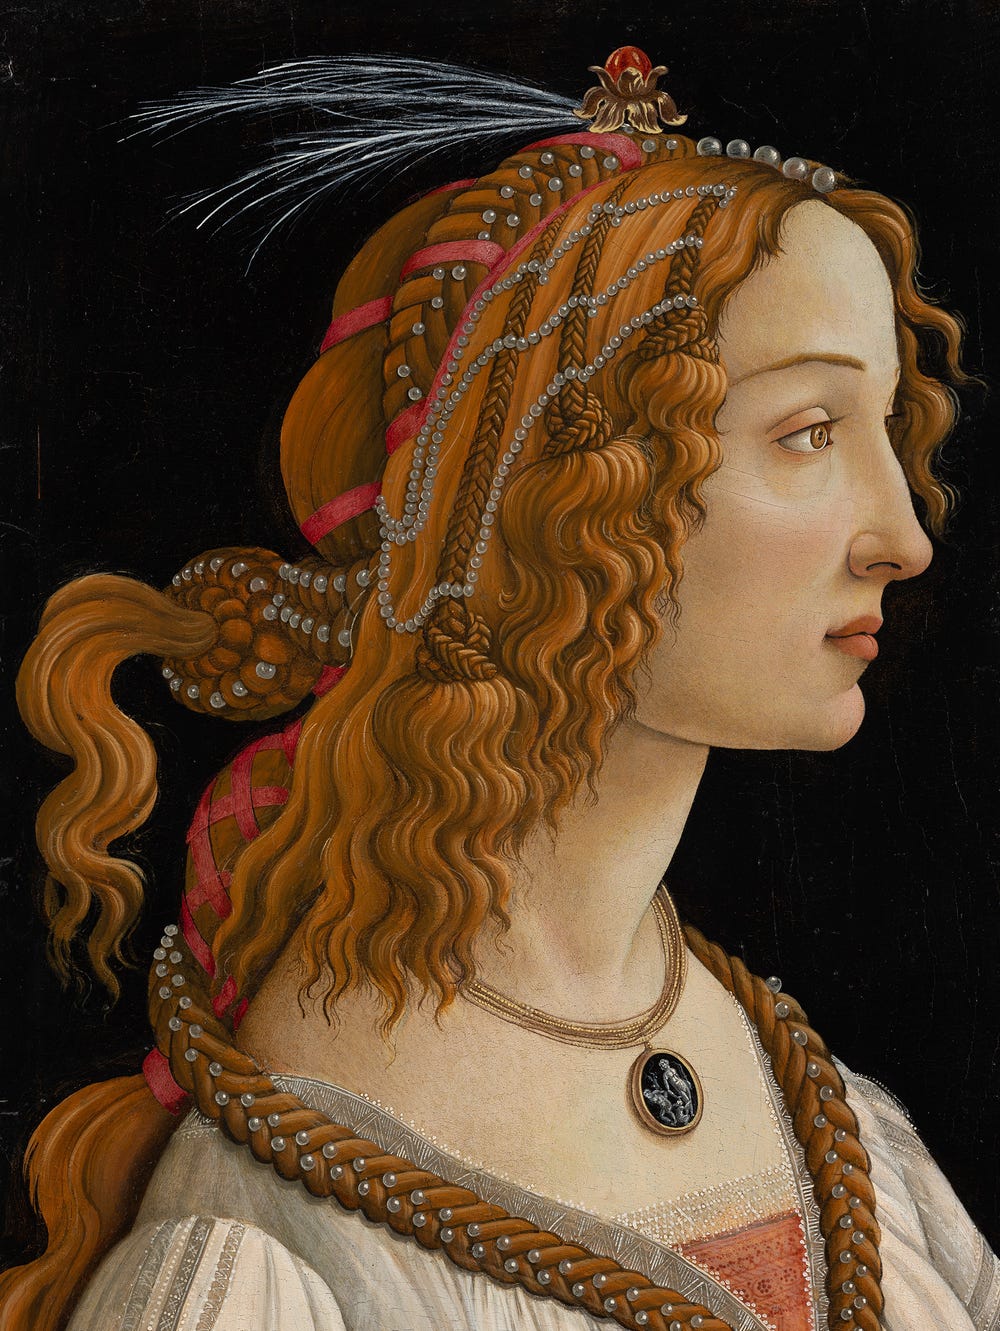 Woman with elaborate hair style facing right